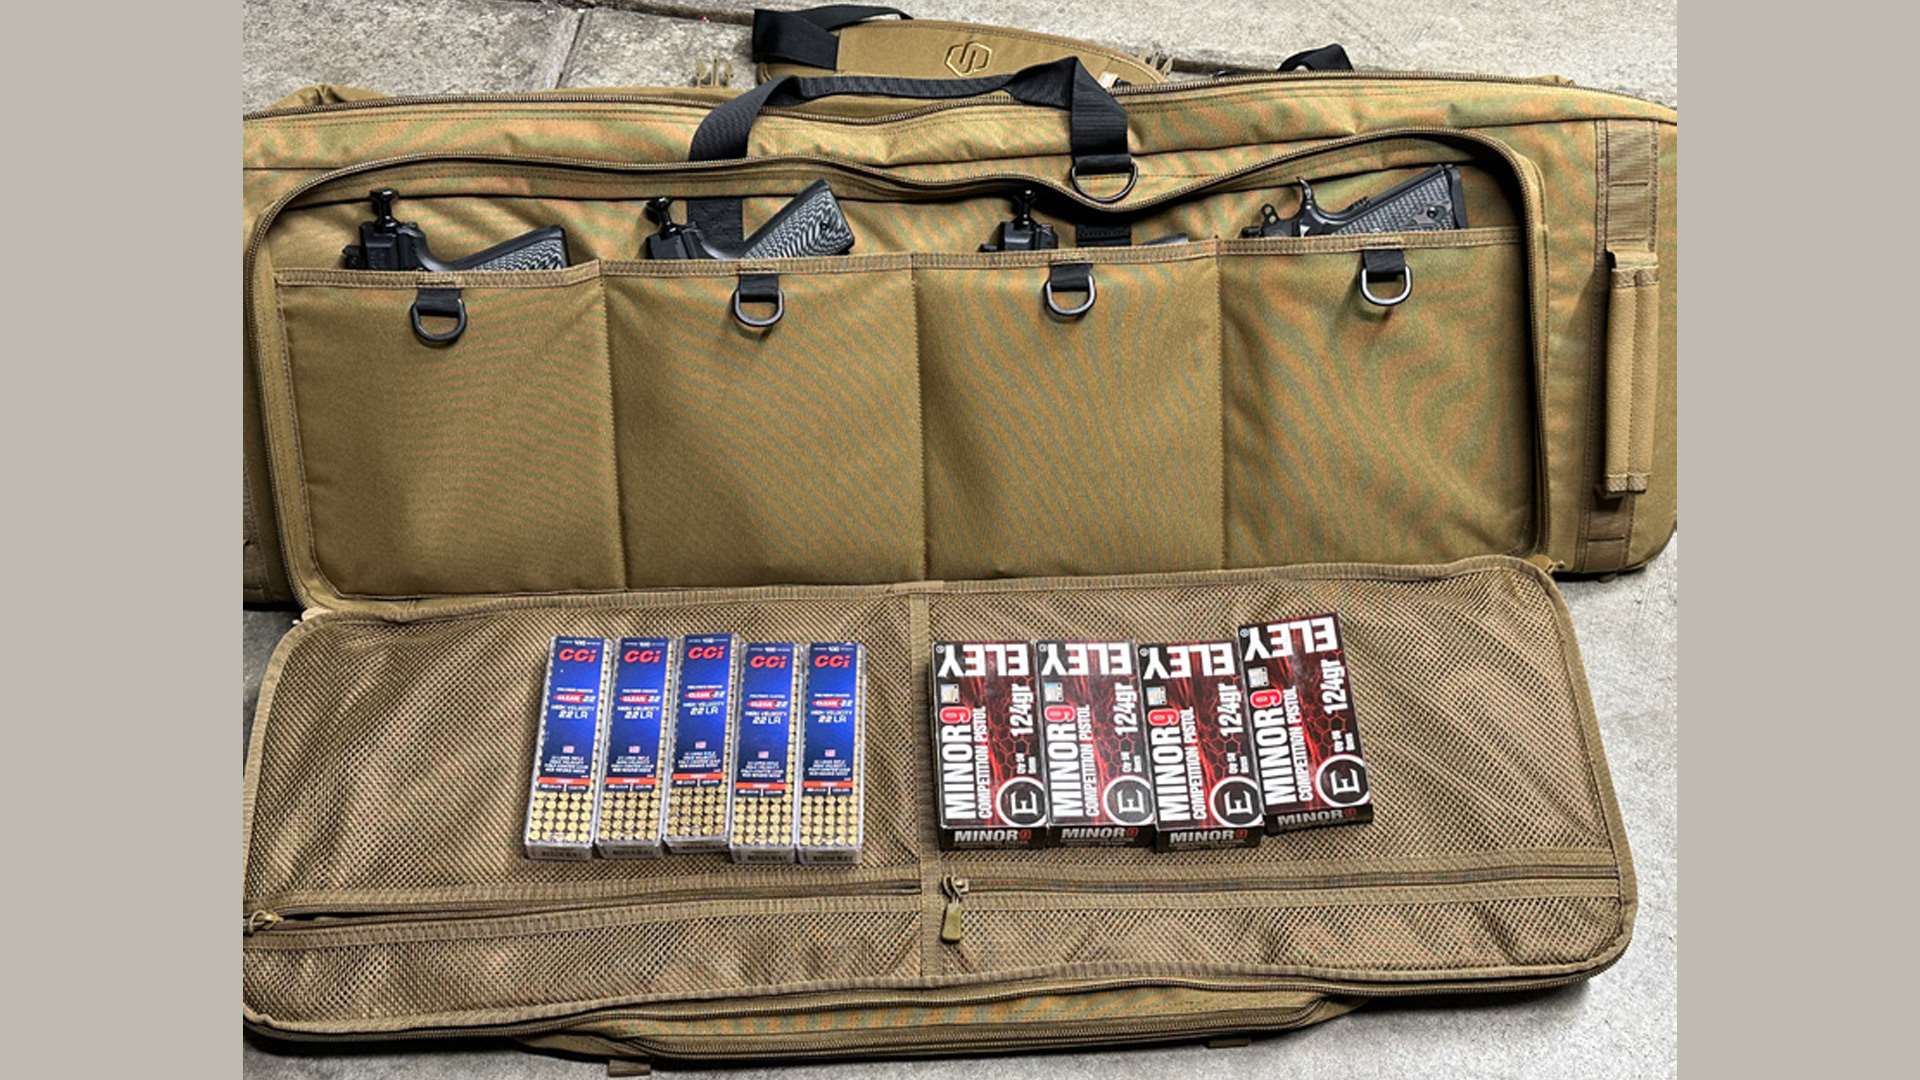 Action pistol ammo in double rifle case